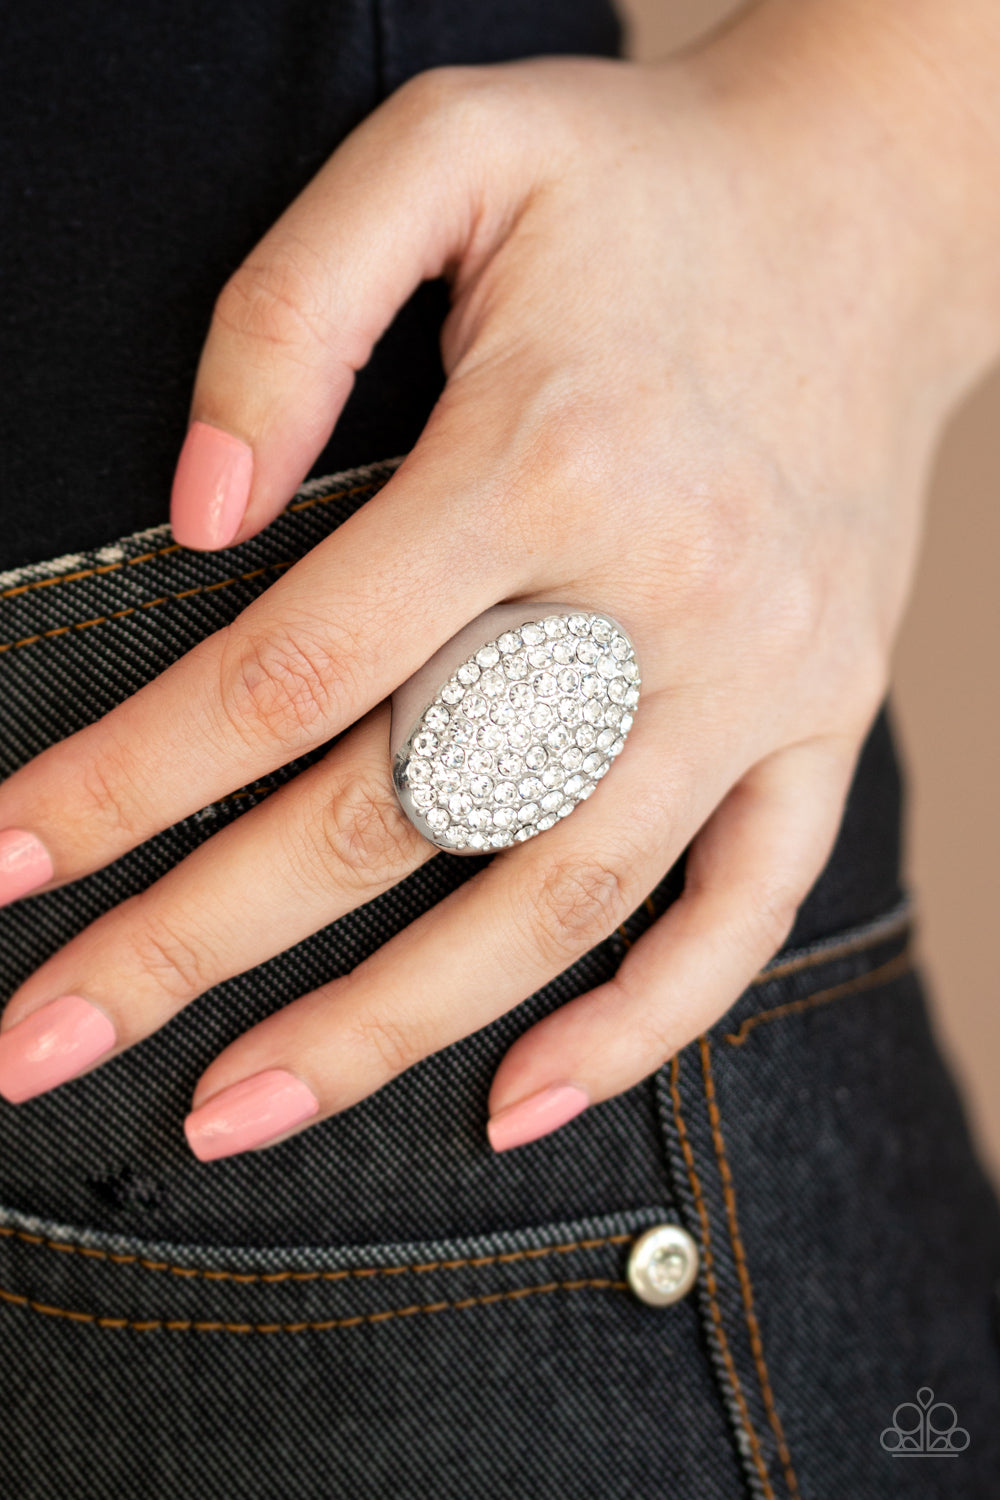 Paparazzi Accessories Bling Scene - White Rings row after row of dazzling white rhinestones radiate out from the center of a thick silver frame, creating a blinding centerpiece atop the finger. Features a stretchy band for a flexible fit.